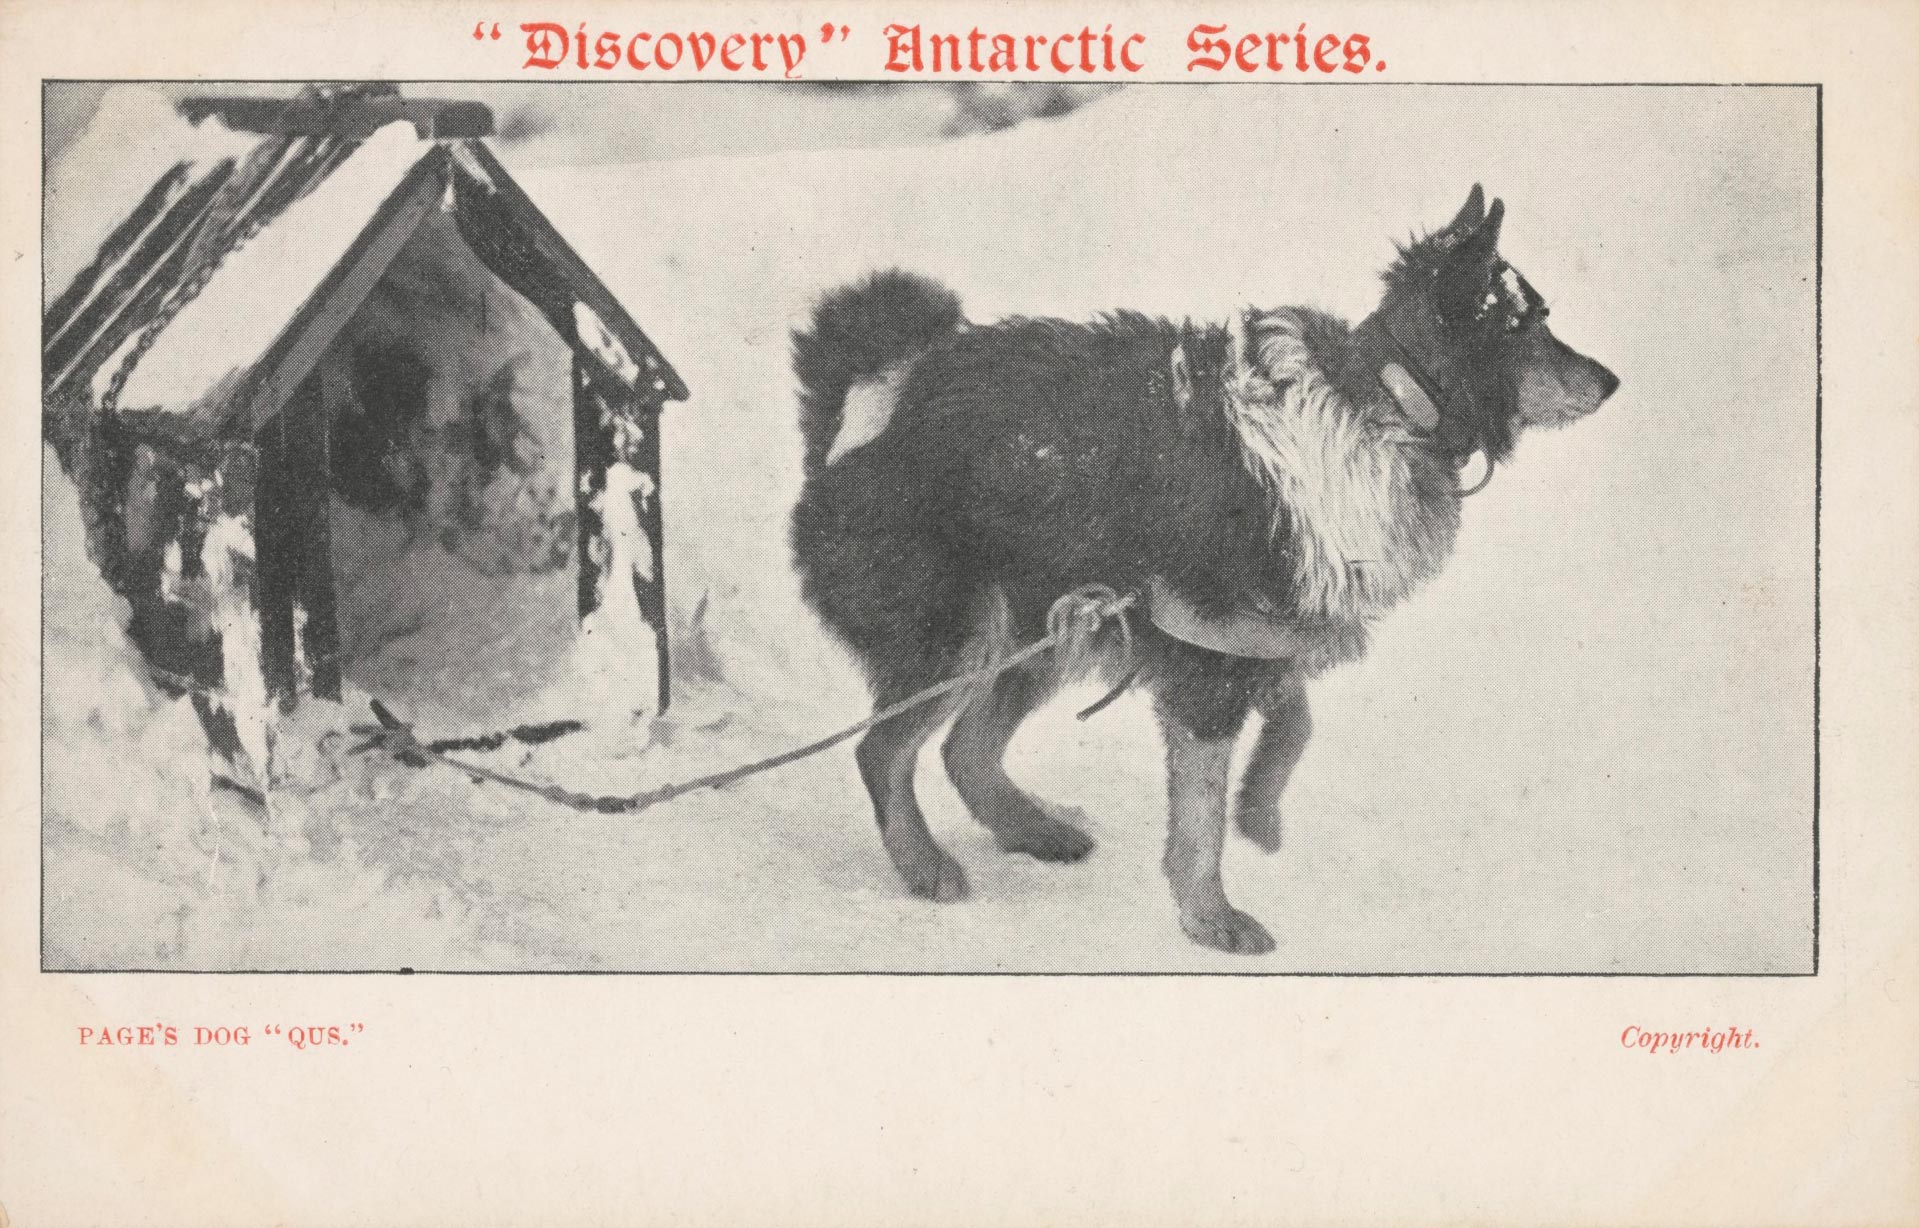 <p>Postcard showing a dog named ‘Qus’, Antarctica, date unknown</p>
